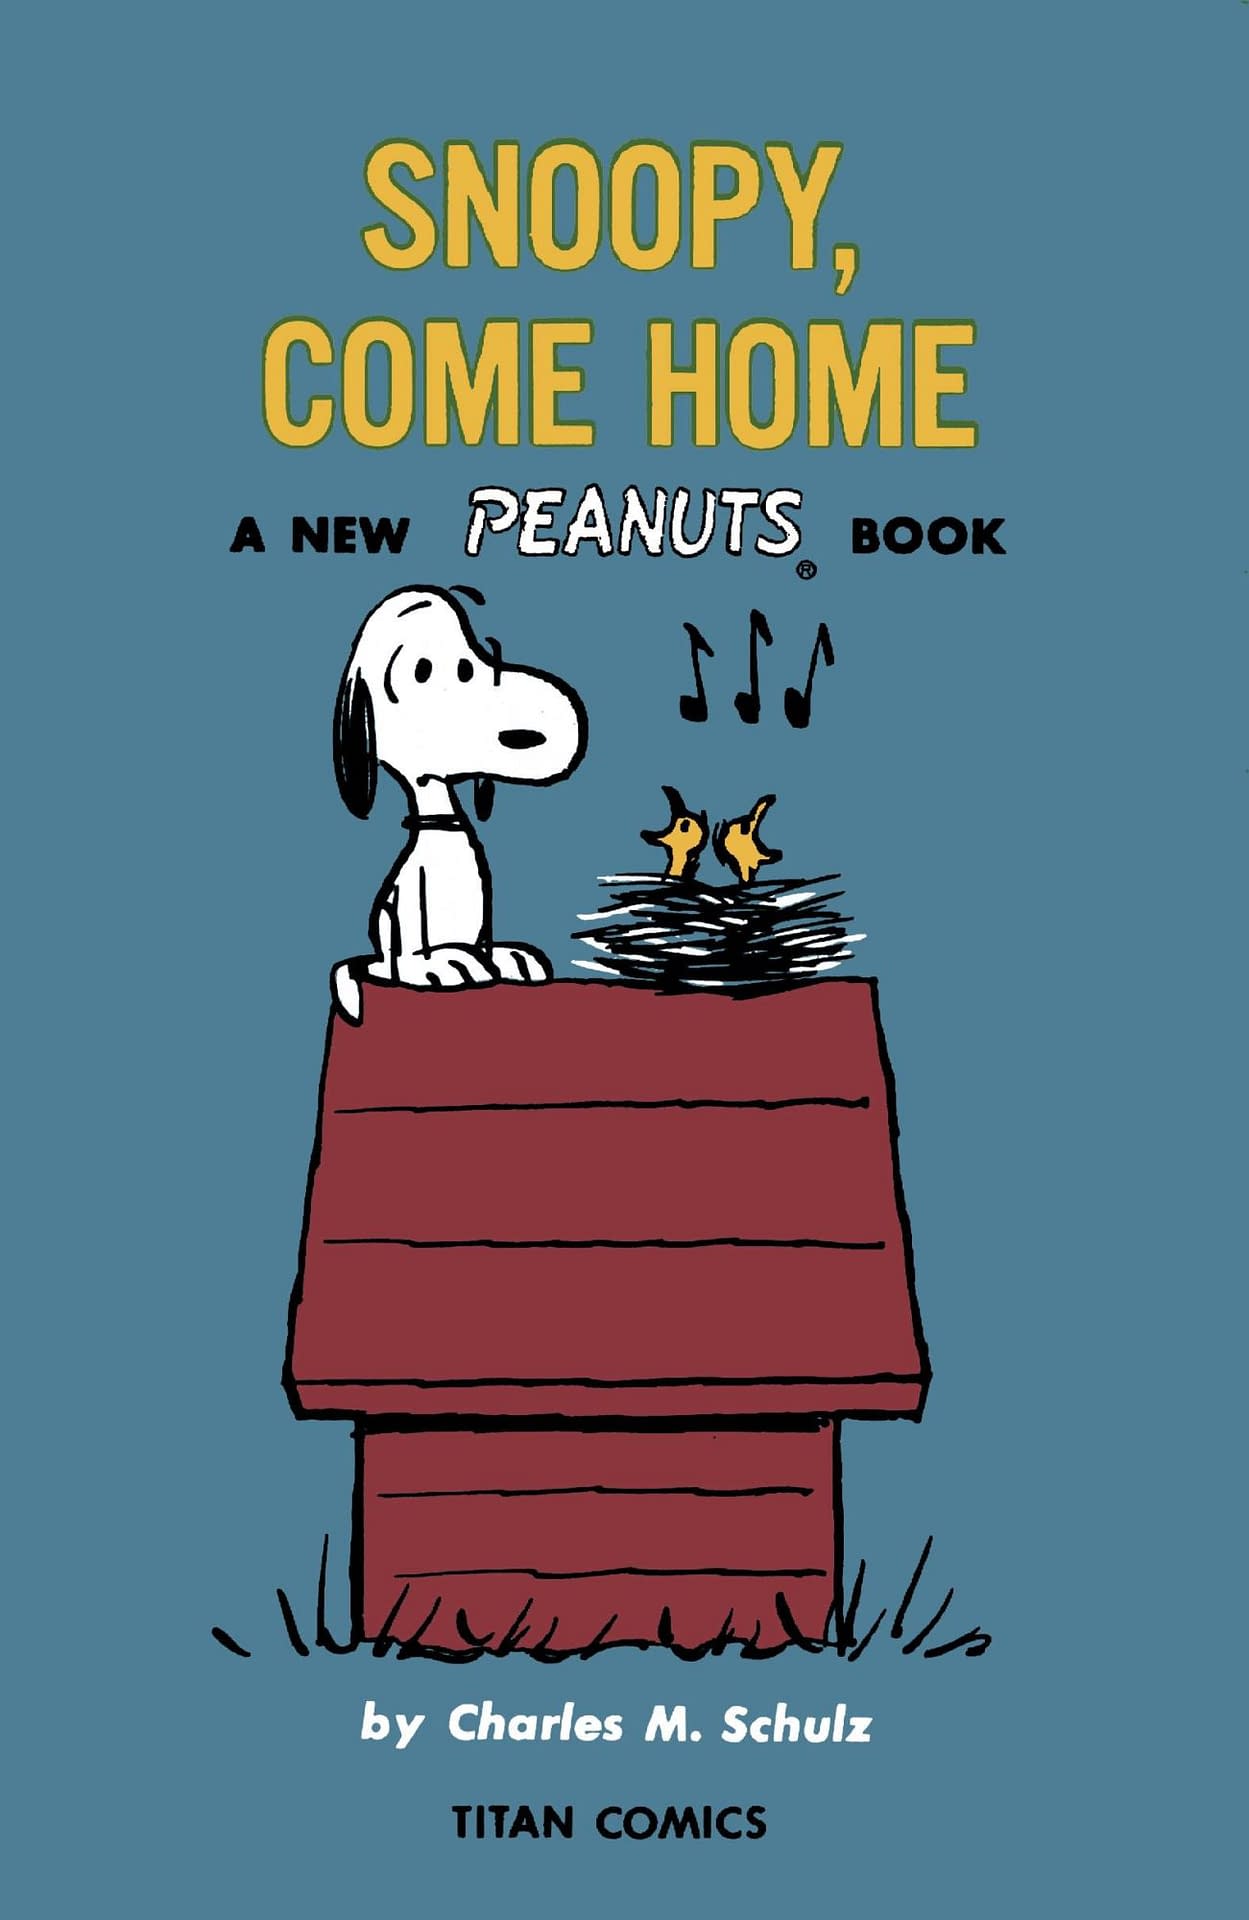 SNOOPY COME HOME